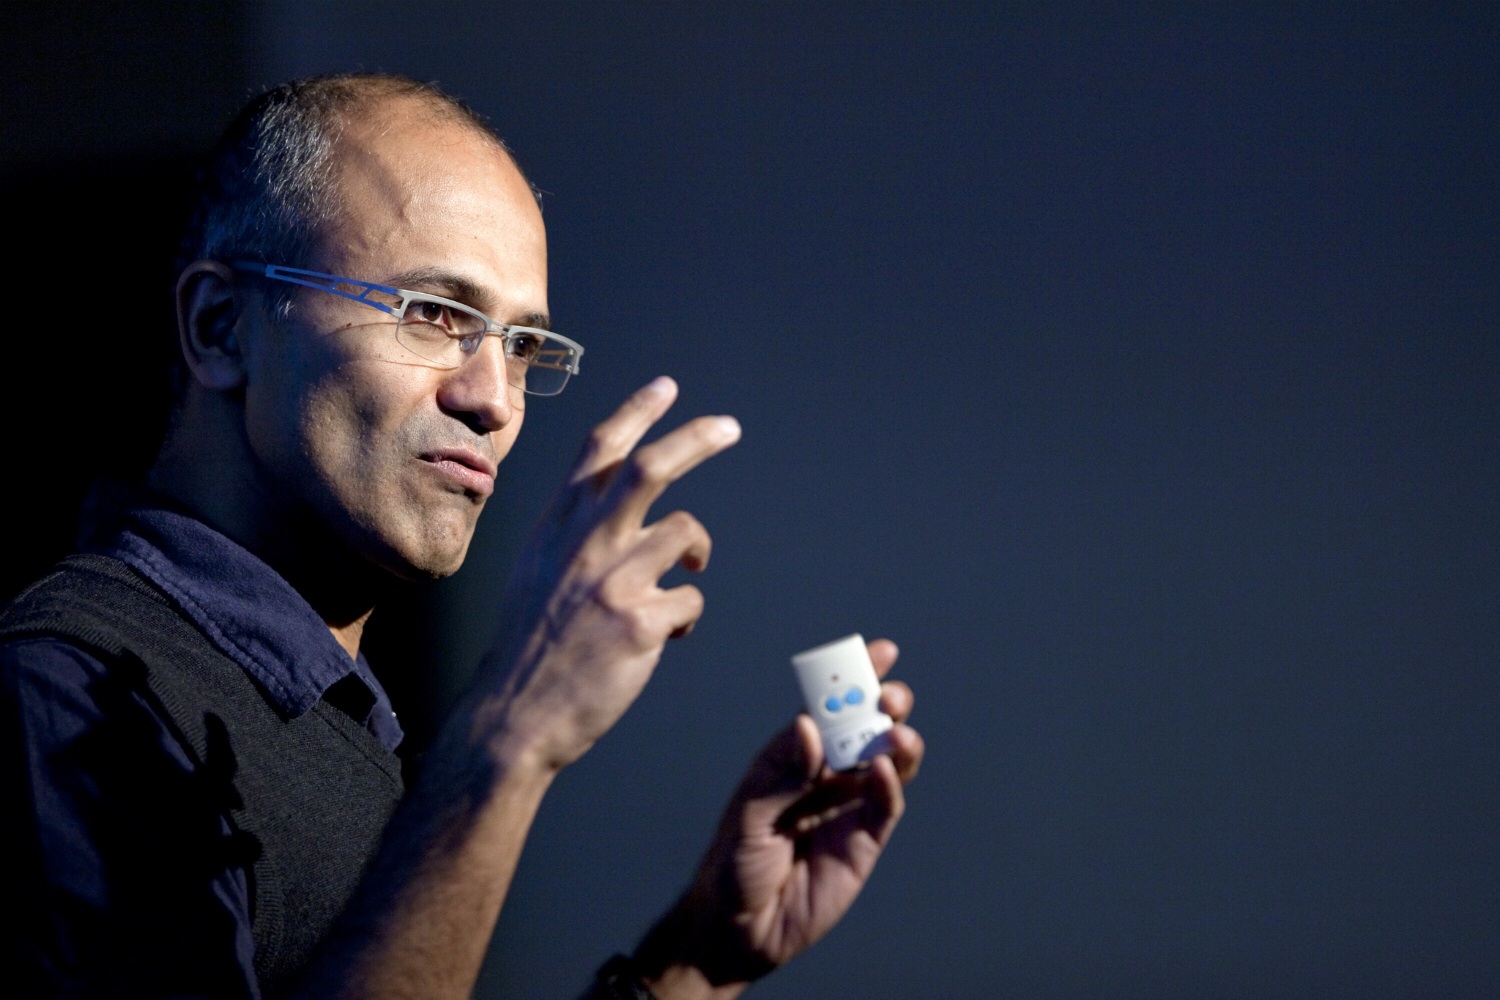 Microsoft's Satya Nadella presents at an event featuring the company's Bing search engine on Dec. 15, 2010. 